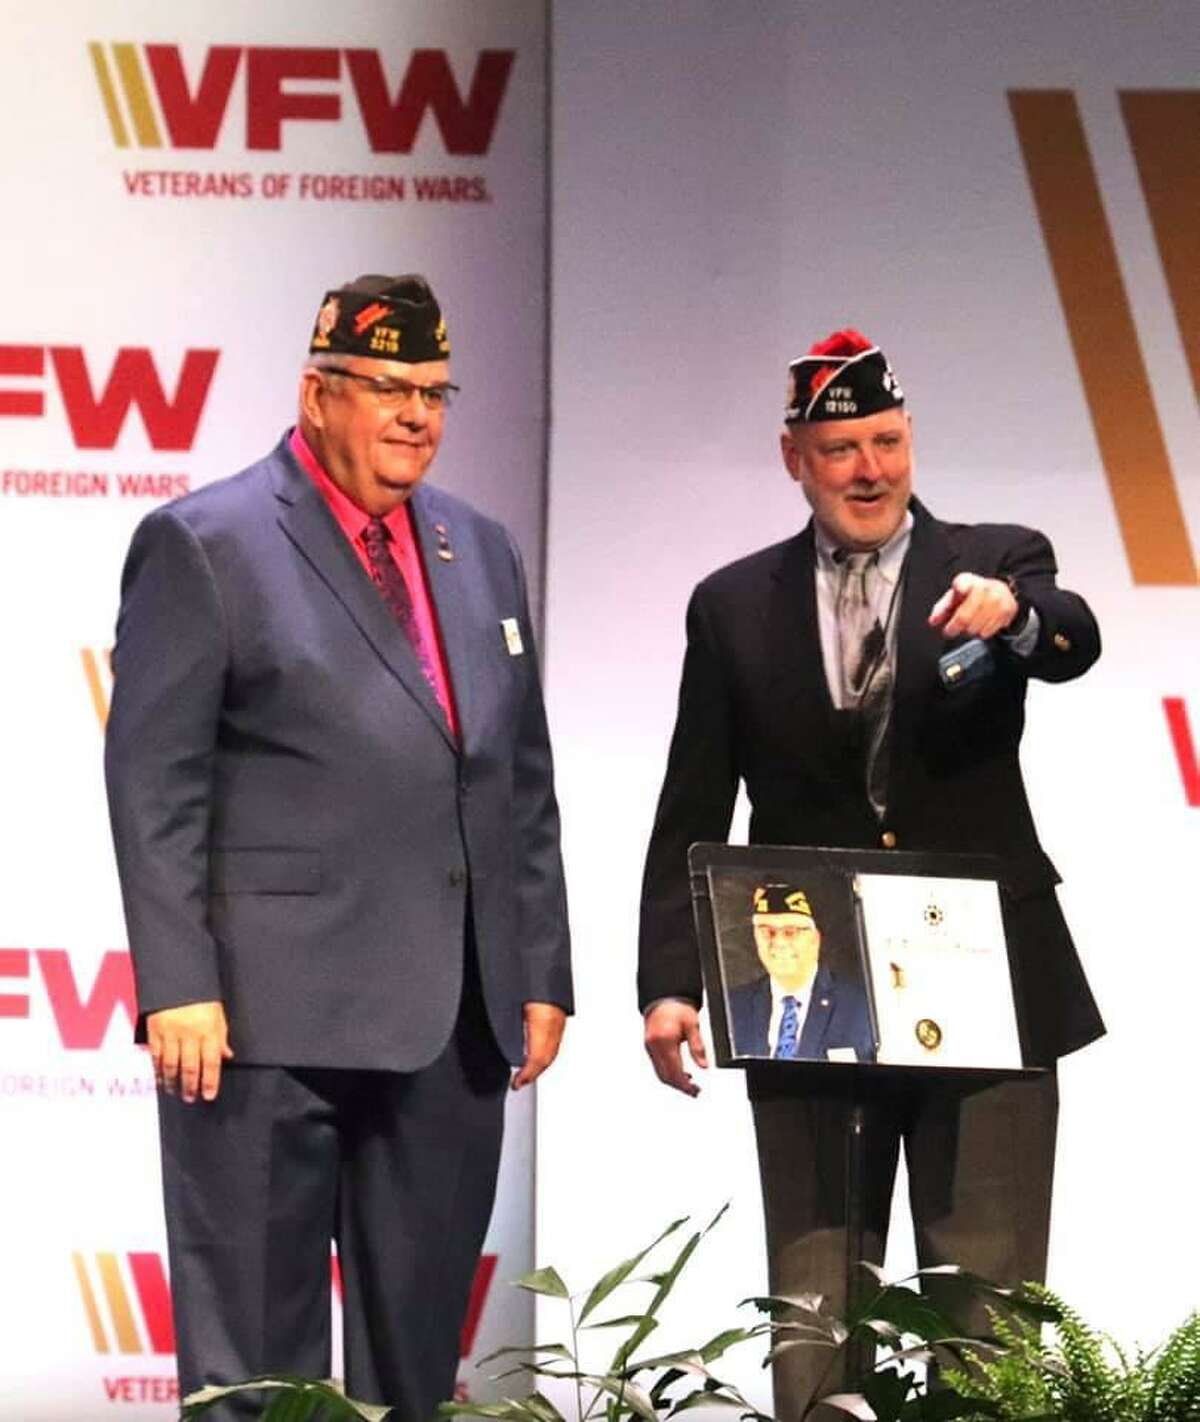 The Veterans of Foreign Wars of the United States New Haven Post 12150 (VFW New Haven) and Post Commander Charles M. Pickett were awarded the esteemed status of All-American for 2020-21 by outgoing VFW National Commander Hal Roesch at the 122nd VFW national convention in Kansas City, Missouri.